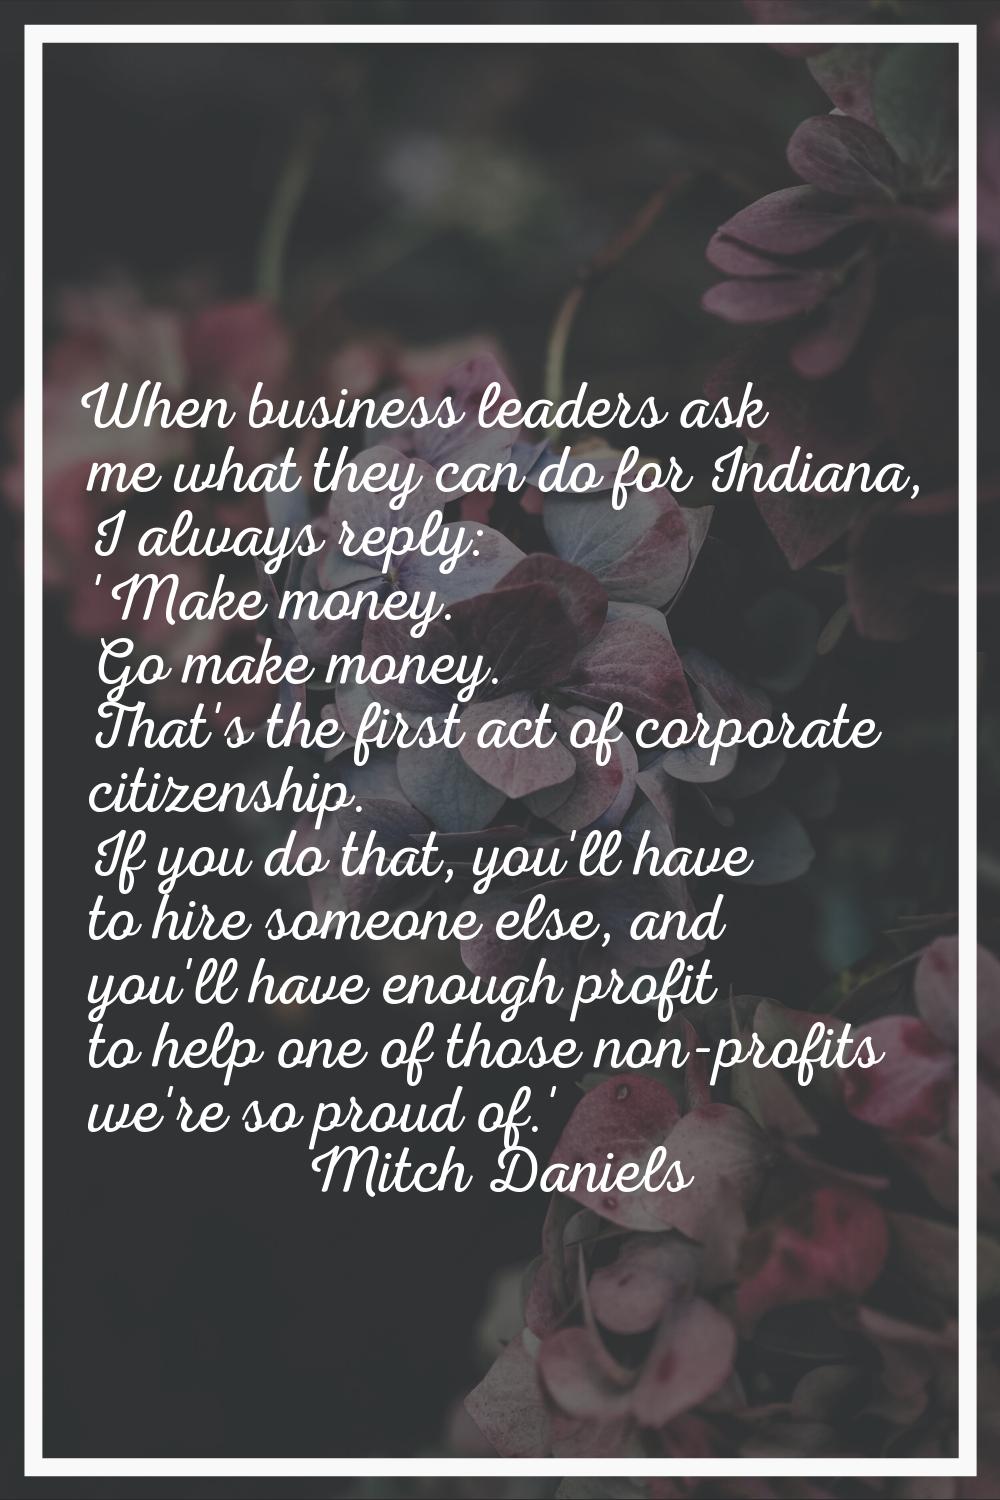 When business leaders ask me what they can do for Indiana, I always reply: 'Make money. Go make mon